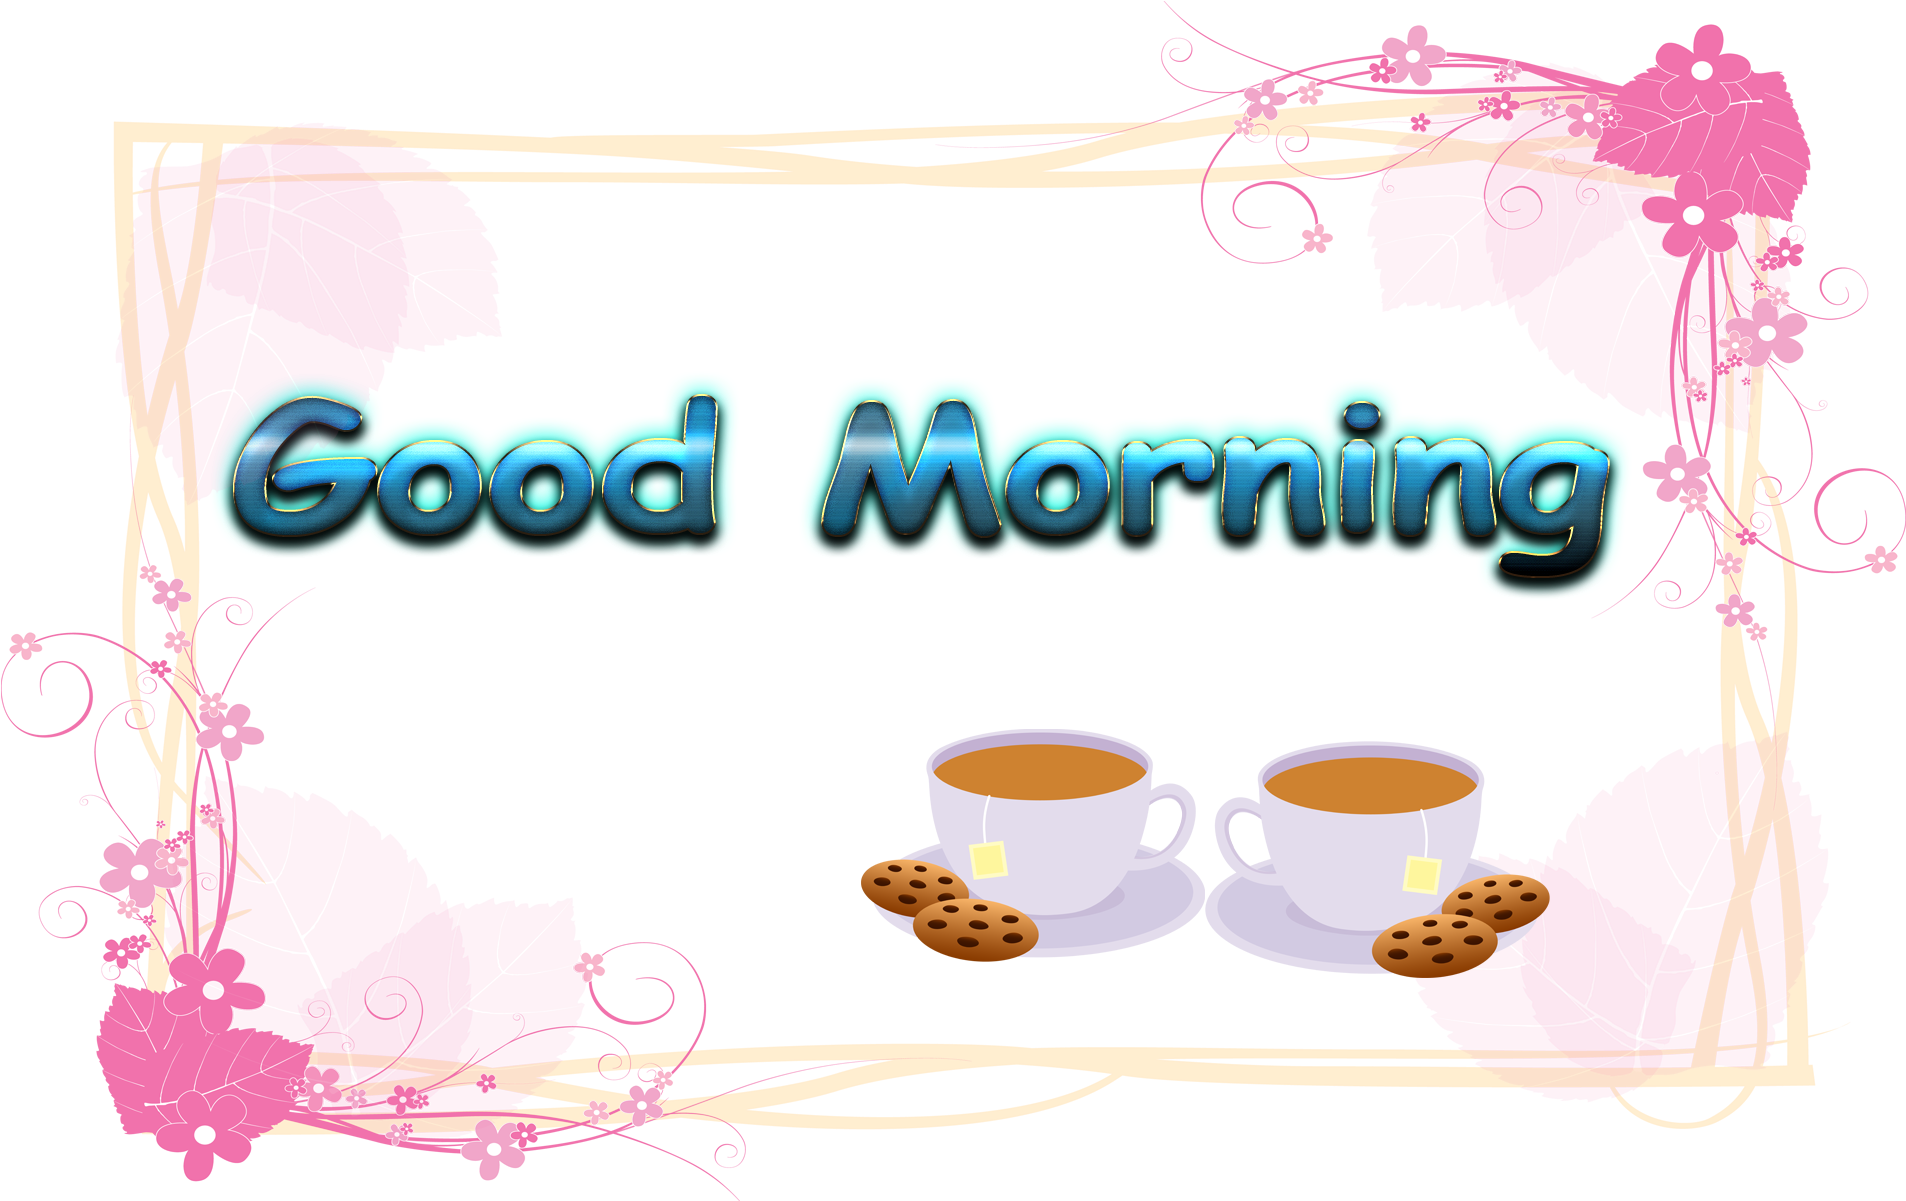 Good Morning Free Download Png - Evening (1920x1200)